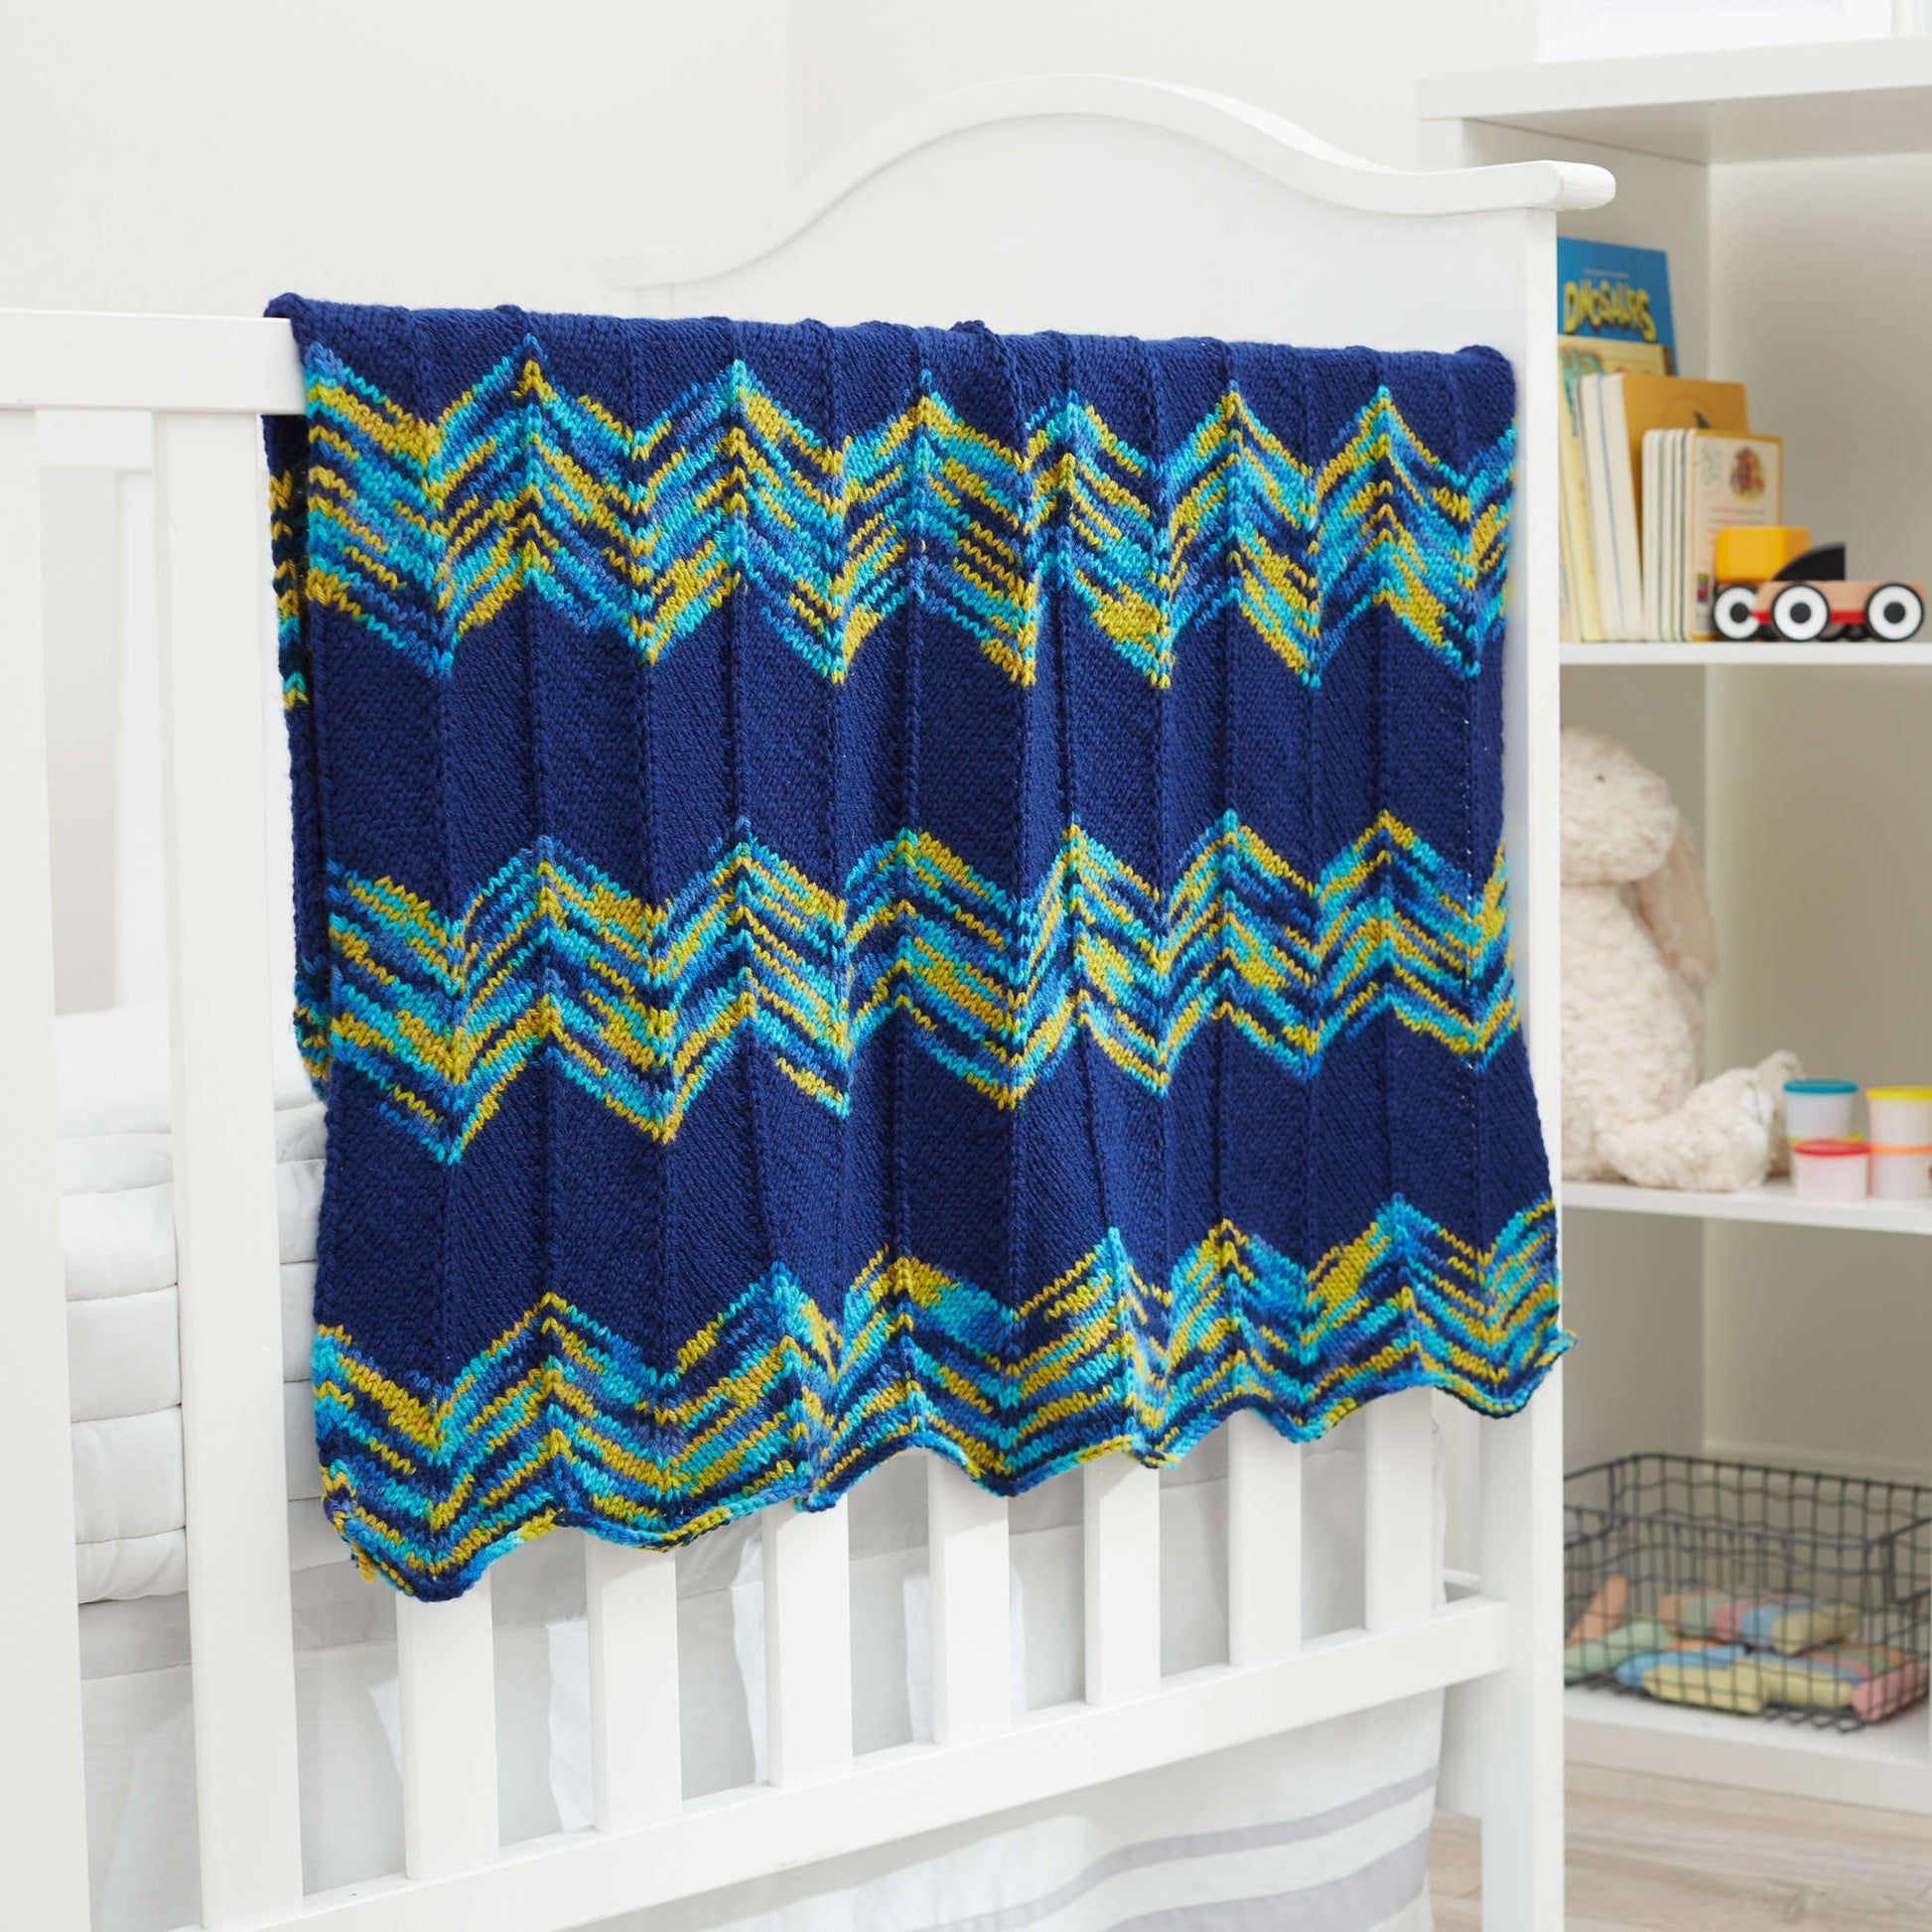 Free Red Heart Knit Blanket For Playtime Pattern